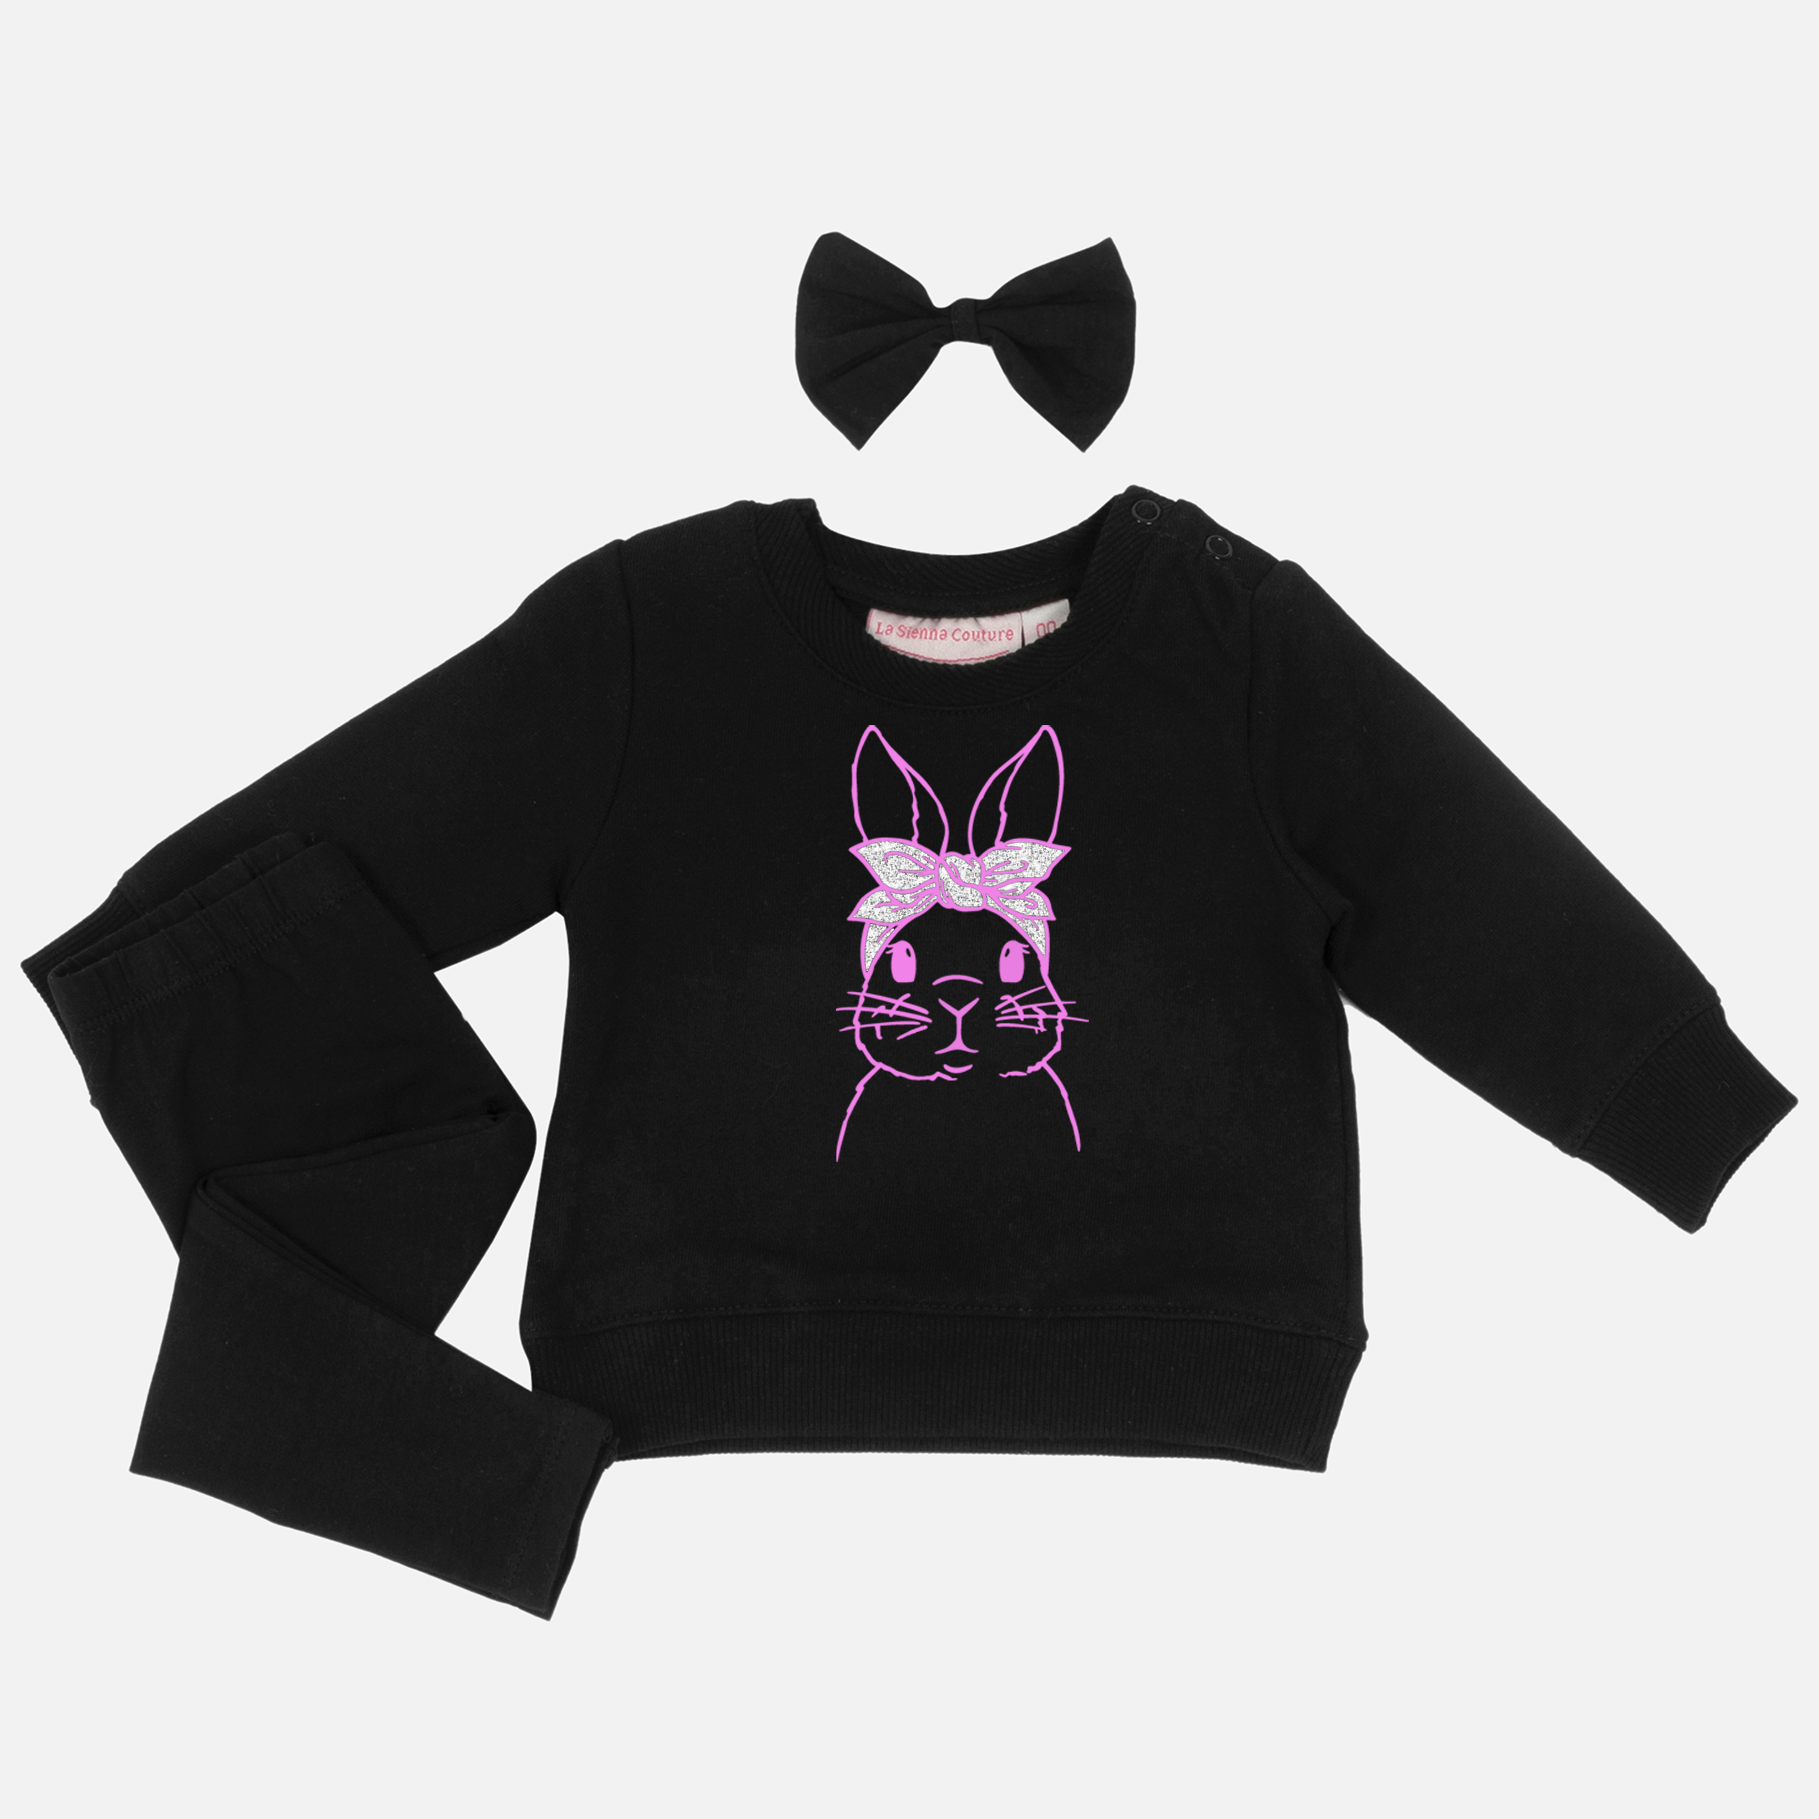 Easter Personalised Crew Neck - Bunny W/ Bow - Black